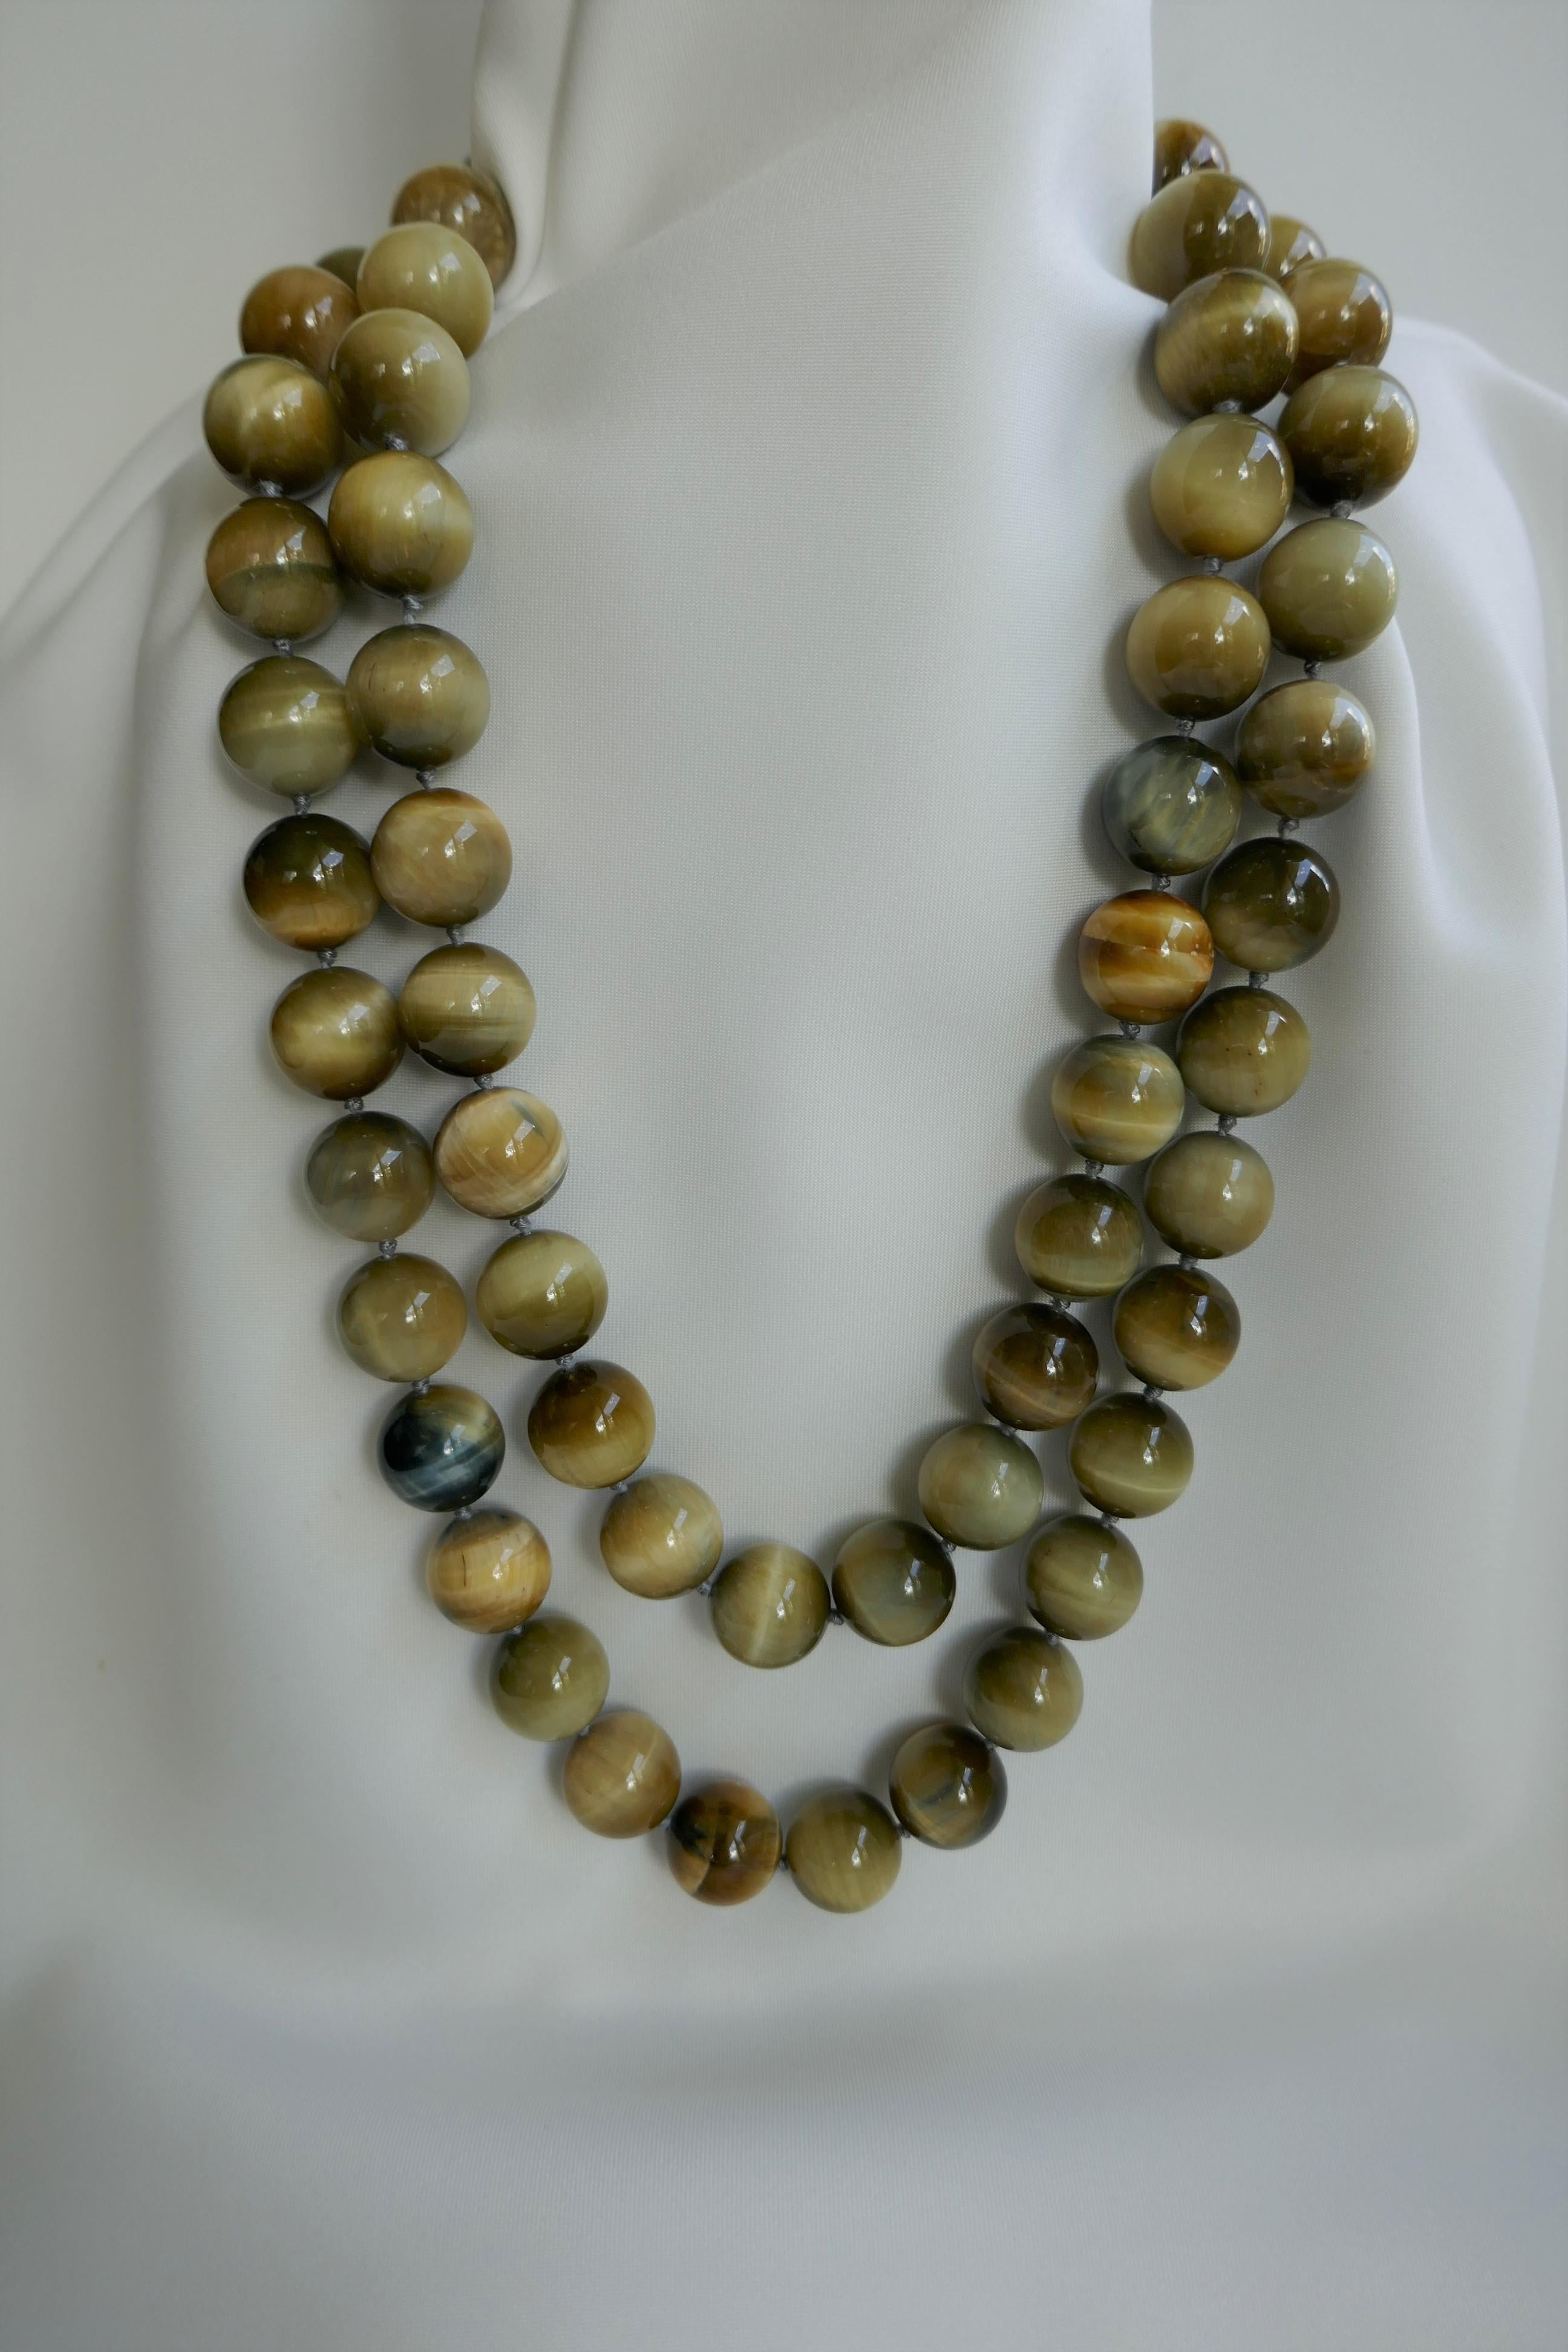 Honey tiger eye a very wearable stone. I feel in love with these beads when I saw them. This 16mm honey tiger eye necklace is a statement necklace that looks beautiful on. It can be worn long or doubled. Given the color of the honey tiger eye bead